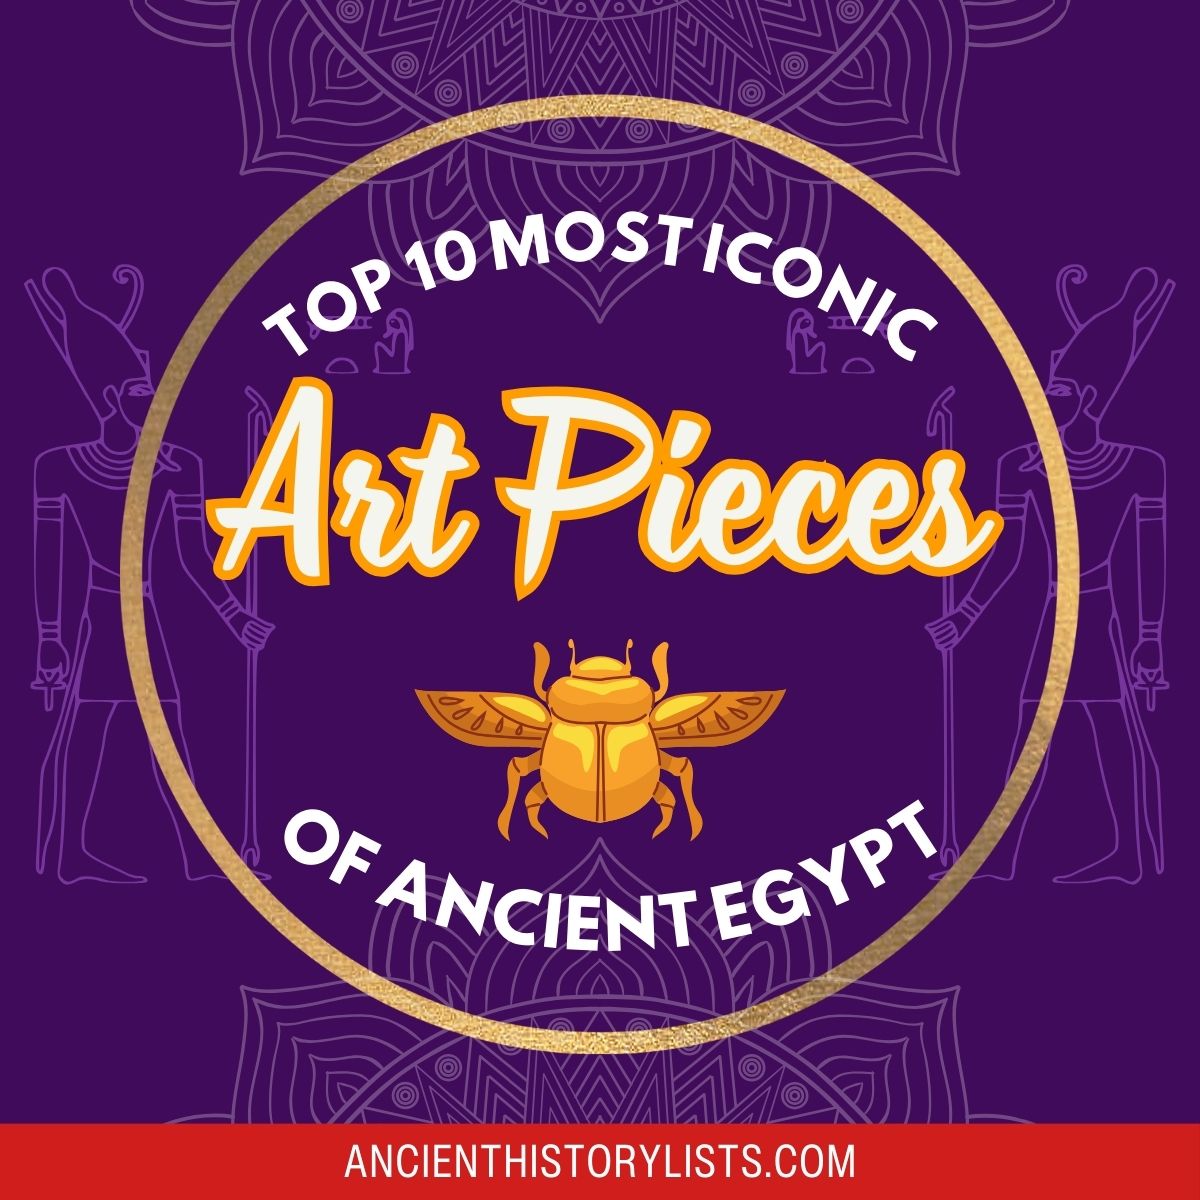 Most Iconic Pieces of Art in Ancient Egypt